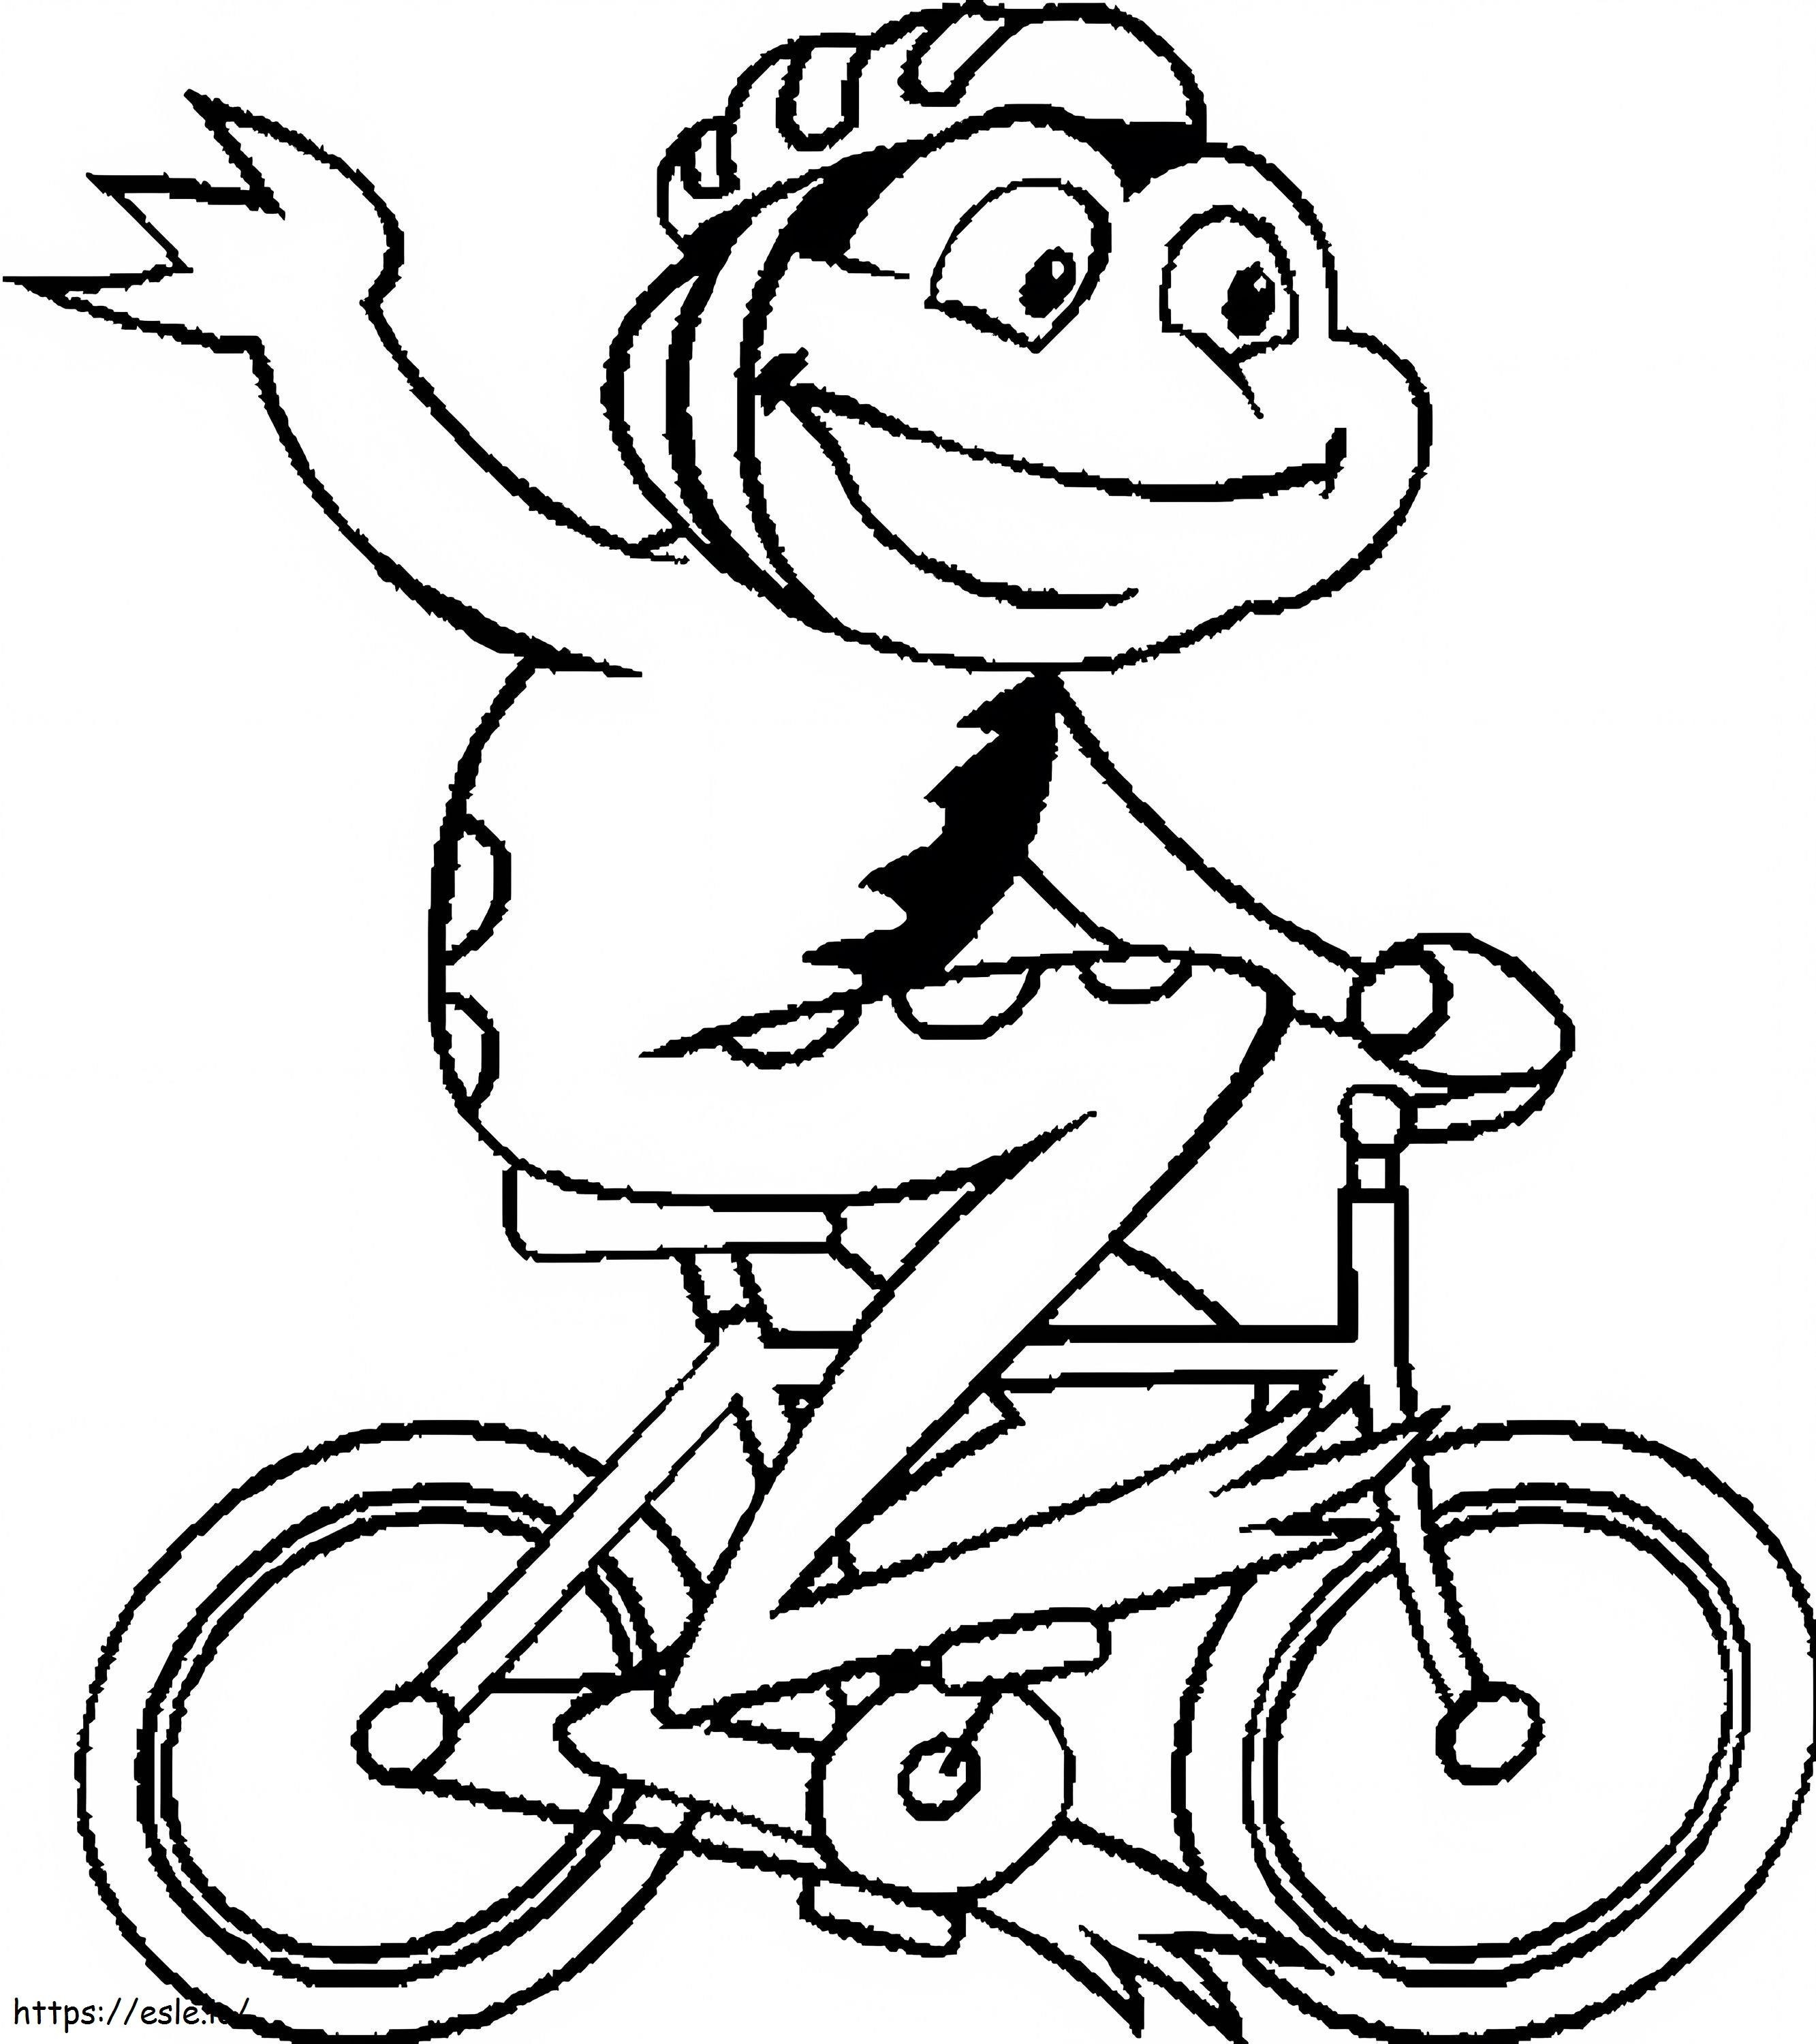 Frog On A Bike coloring page